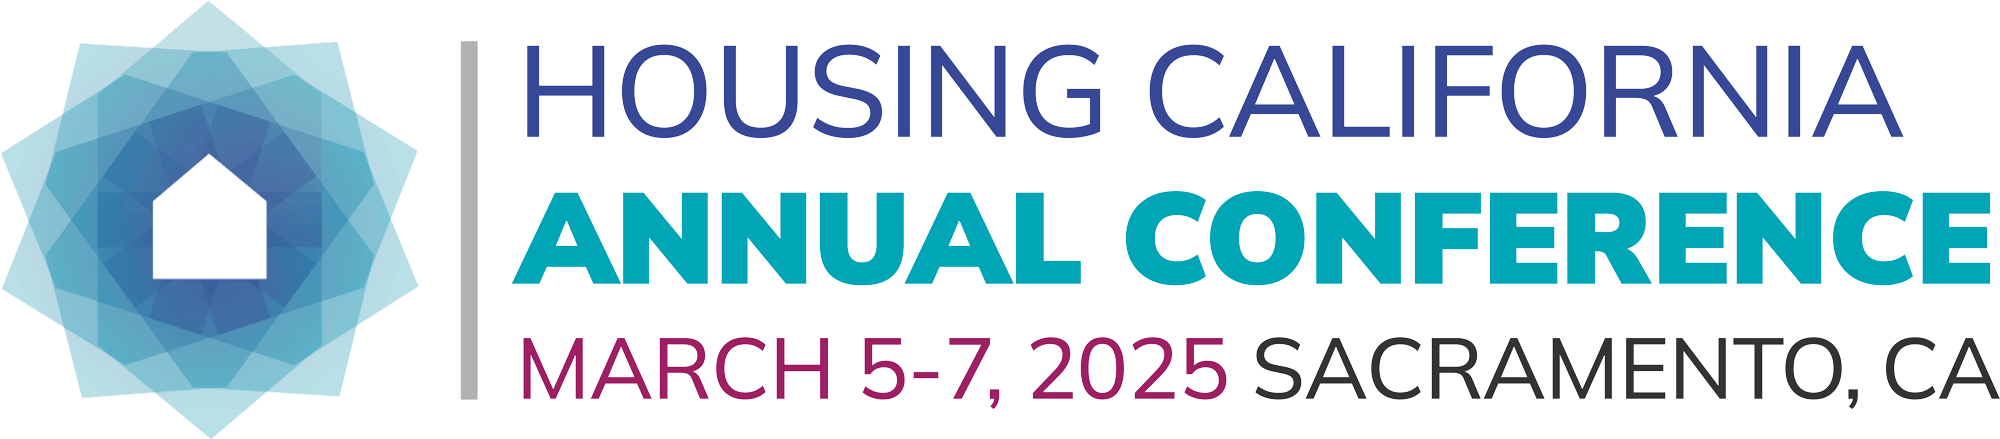 Main banner image with text that says Housing California Annual Conference, March 5-7, 2025, Sacramento, California